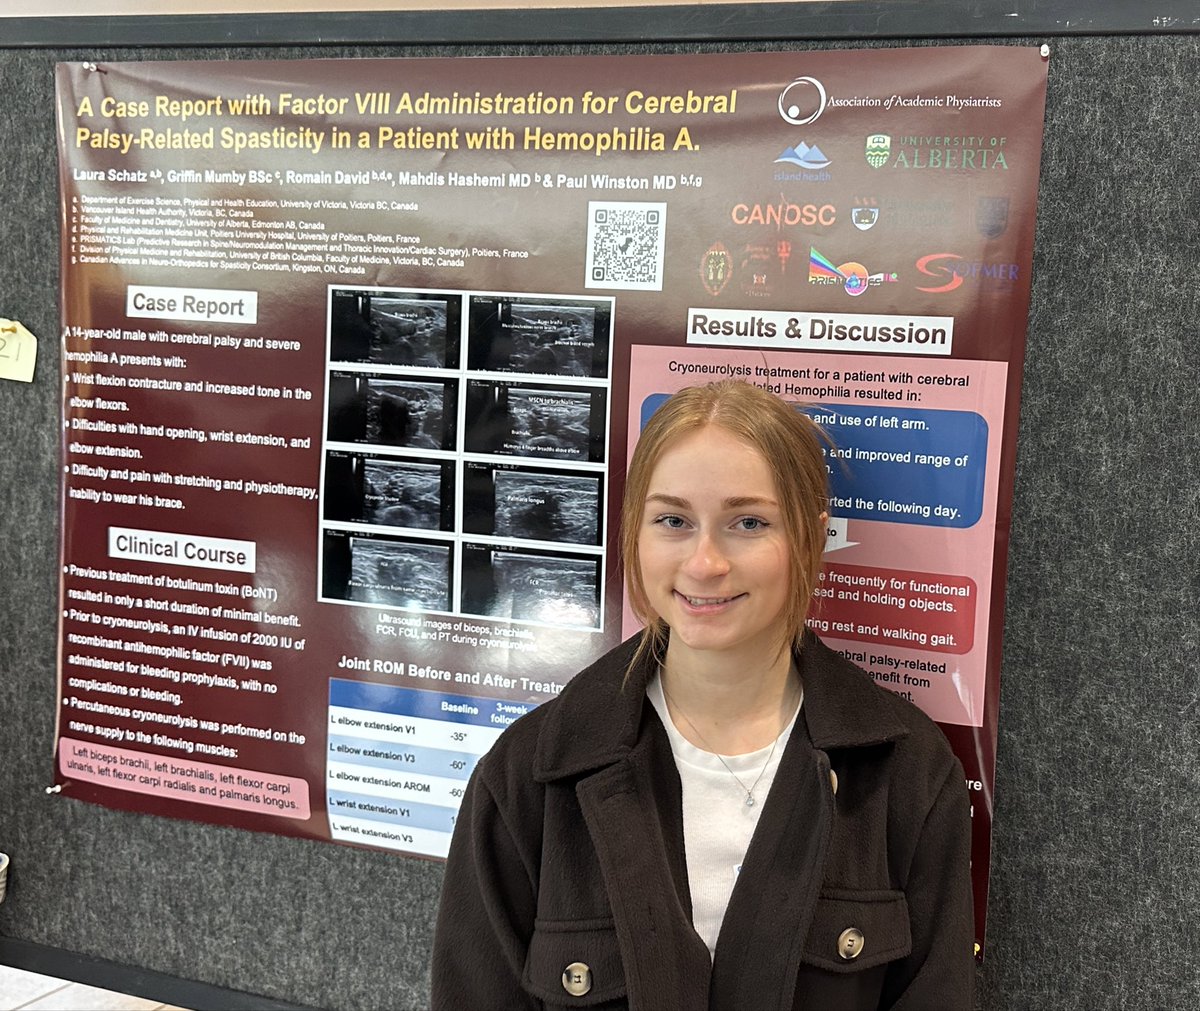 Laura Schatz new @uvic kinesiology grad with her award winning poster. Multisite treatment of a teenager with hemorrhagic hemiplegia due to hemophilia with #cryoneurolysis to prevent frequent injections. #safety